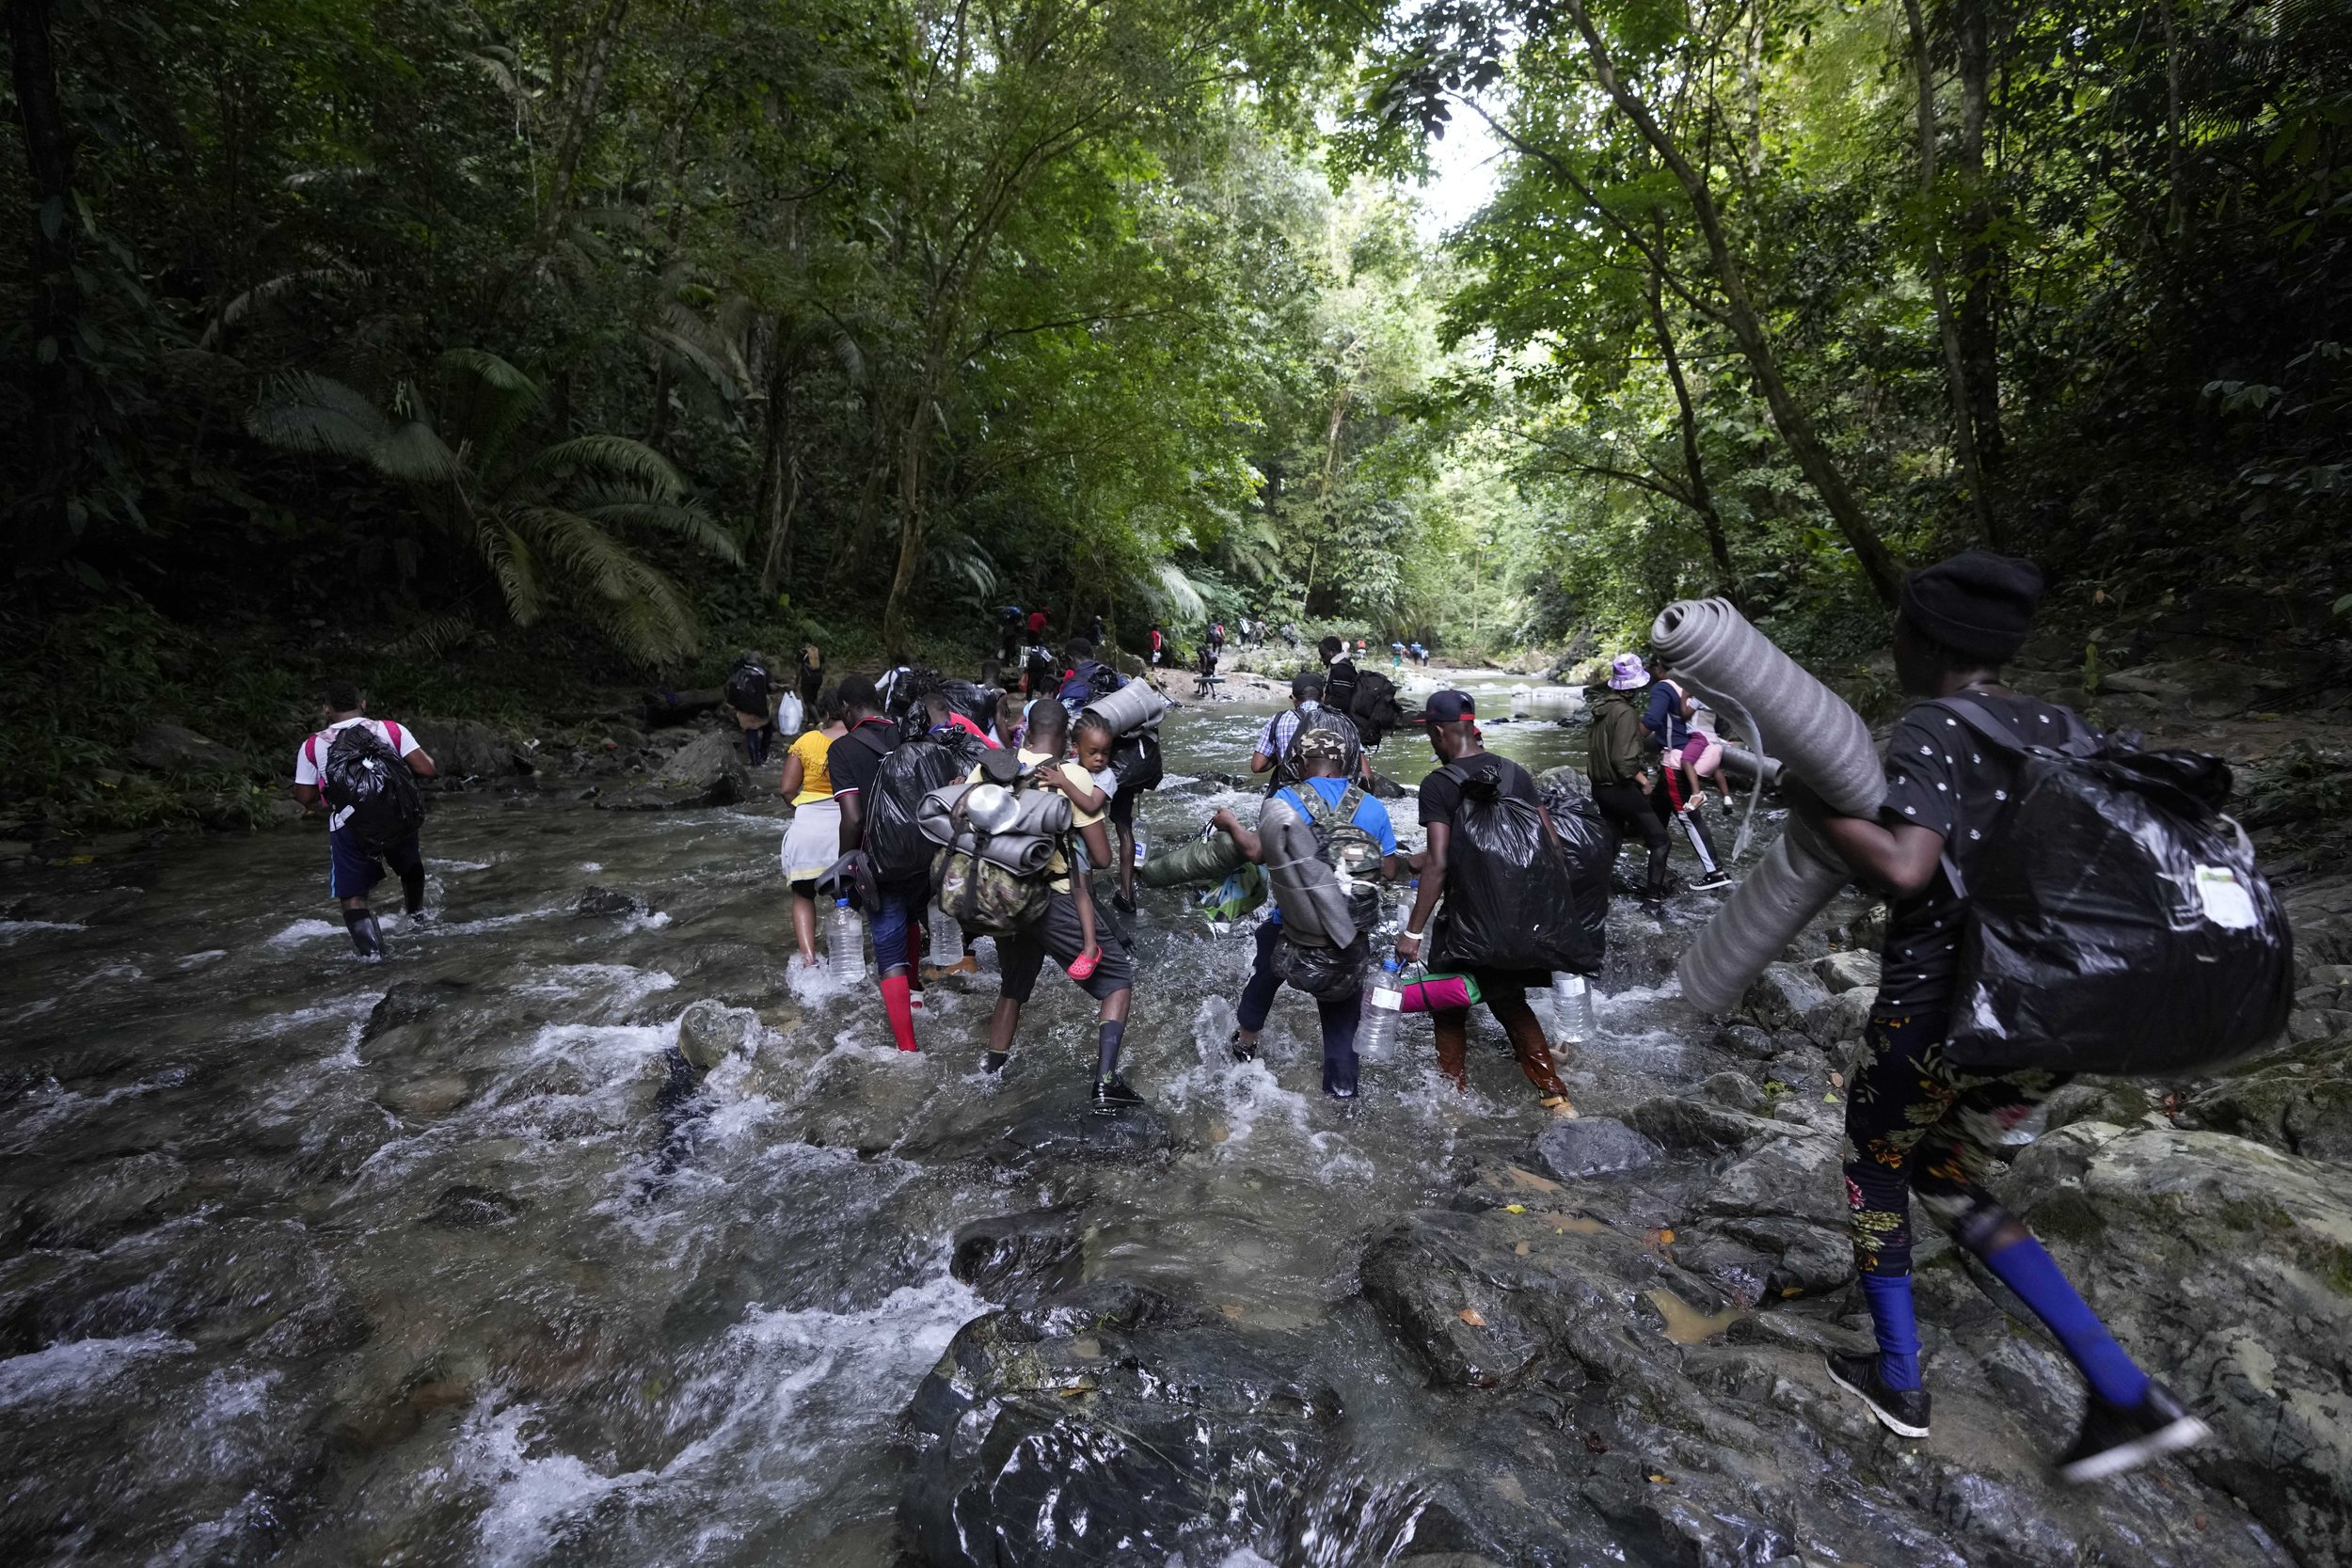  Migrants cross the Acandi River on their journey north, near Acandi, Colombia, on Sept. 15, 2021. The migrants, mostly Haitians, are on their way to crossing the Darien Gap from Colombia into Panama dreaming of reaching the U.S. (AP Photo/Fernando V